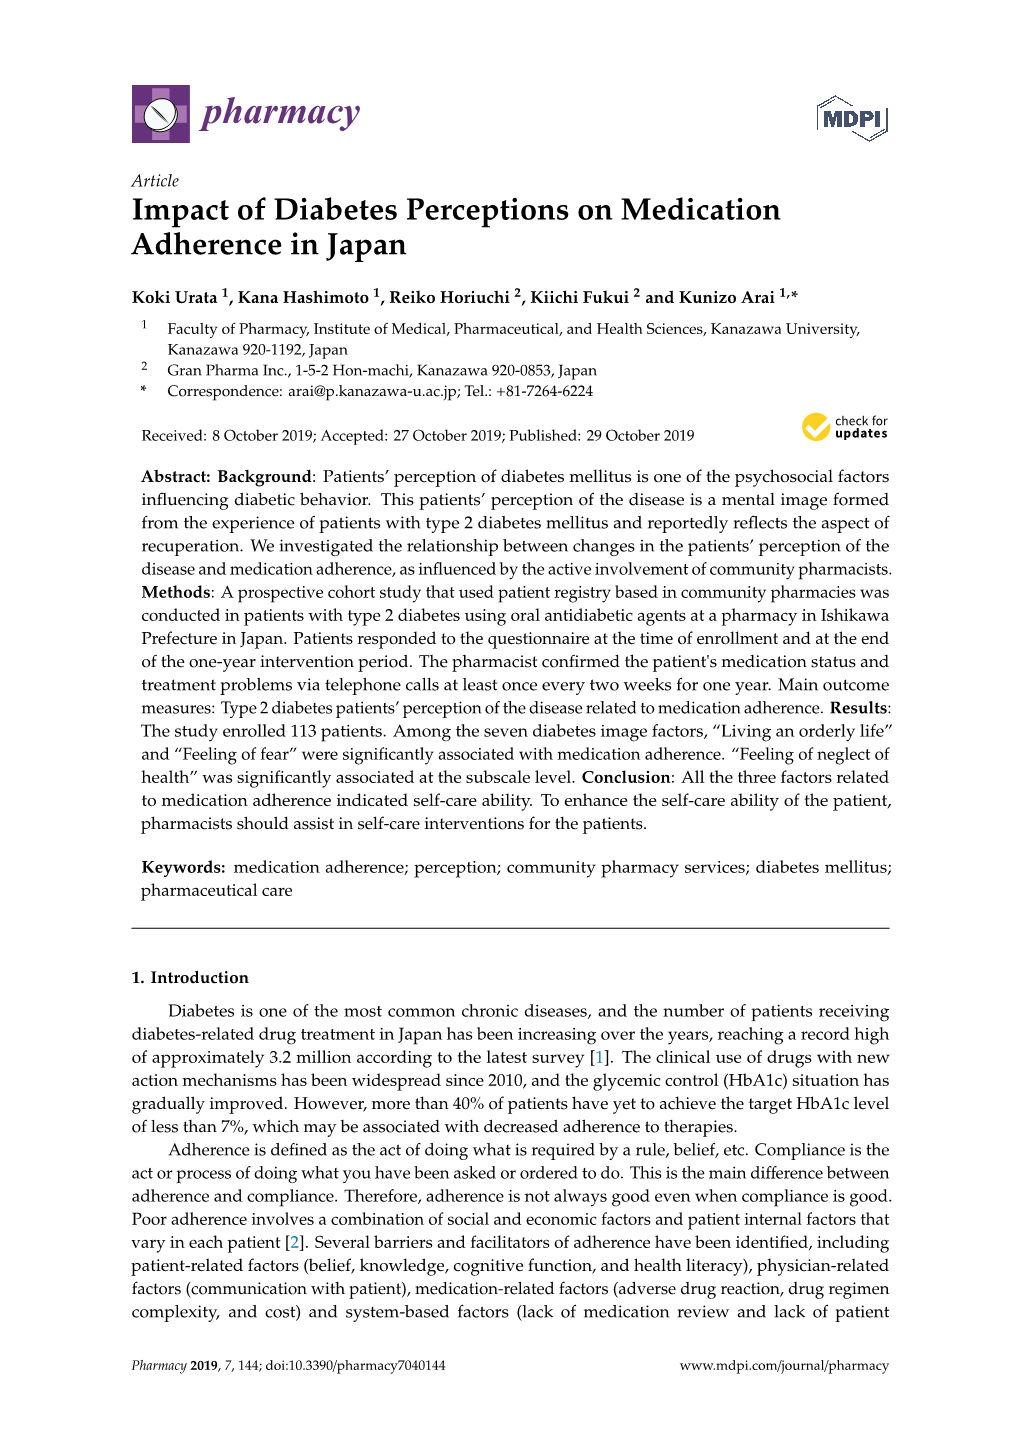 Impact of Diabetes Perceptions on Medication Adherence in Japan